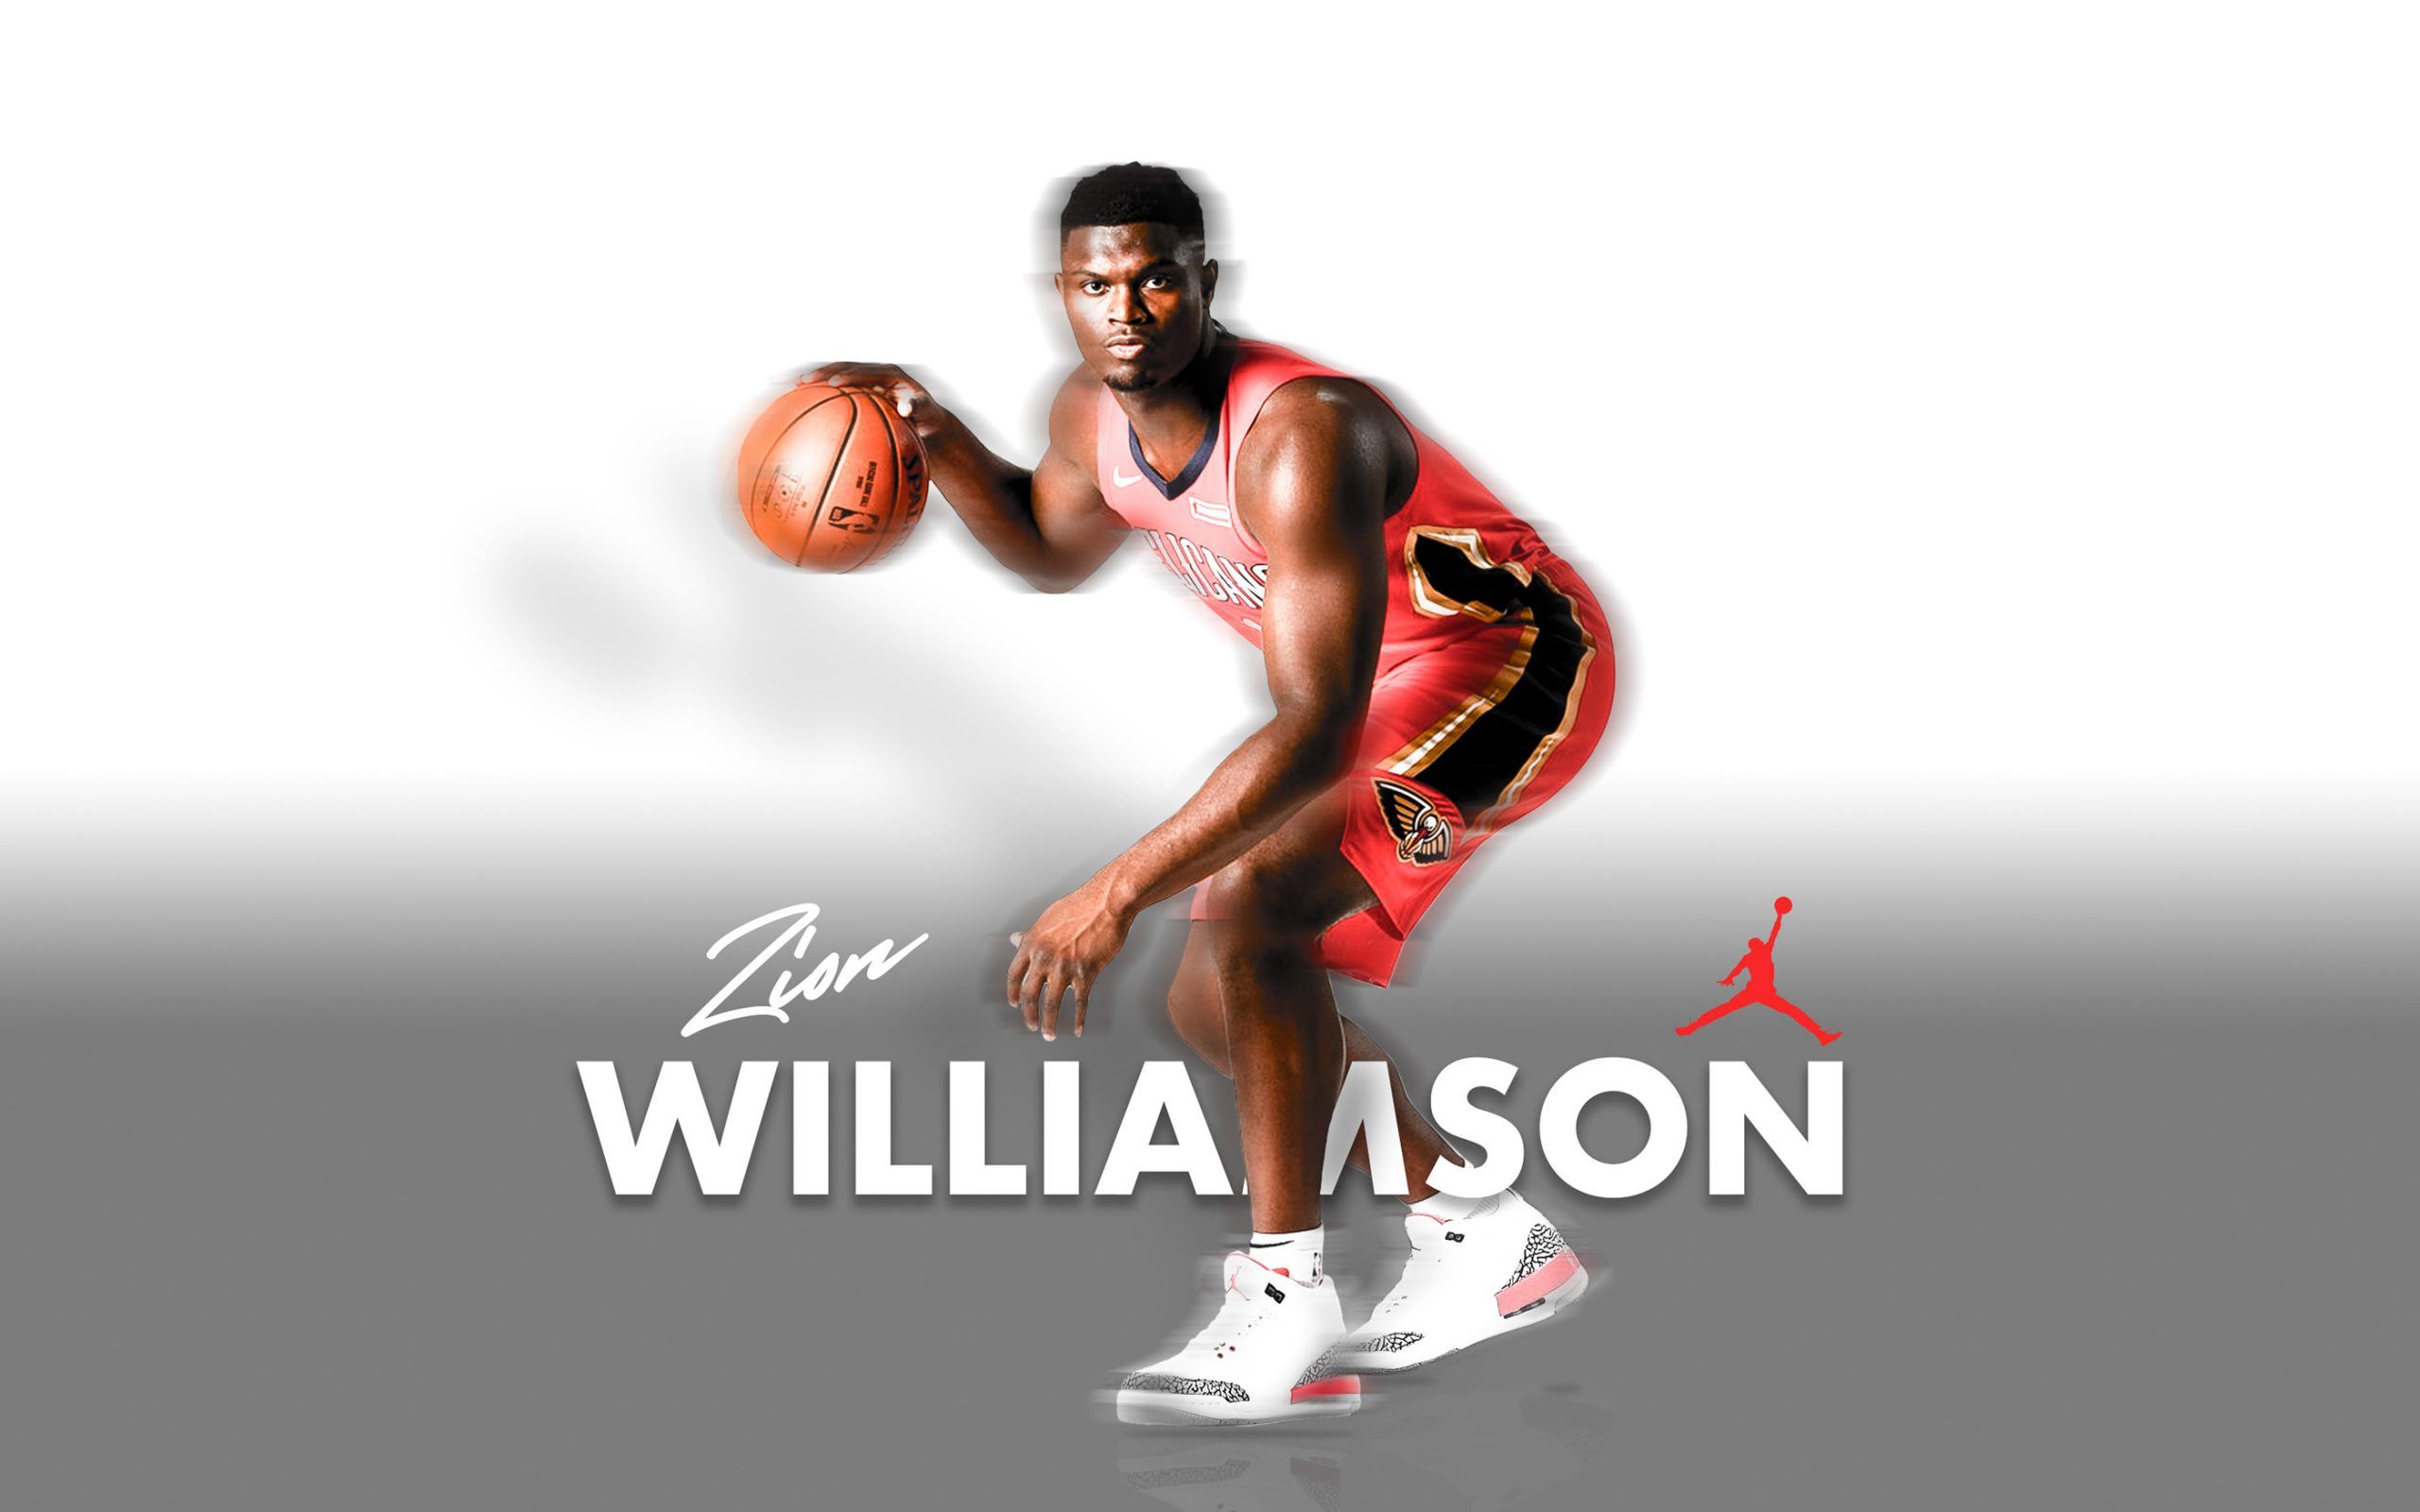 Why Zion Williamson is so great?